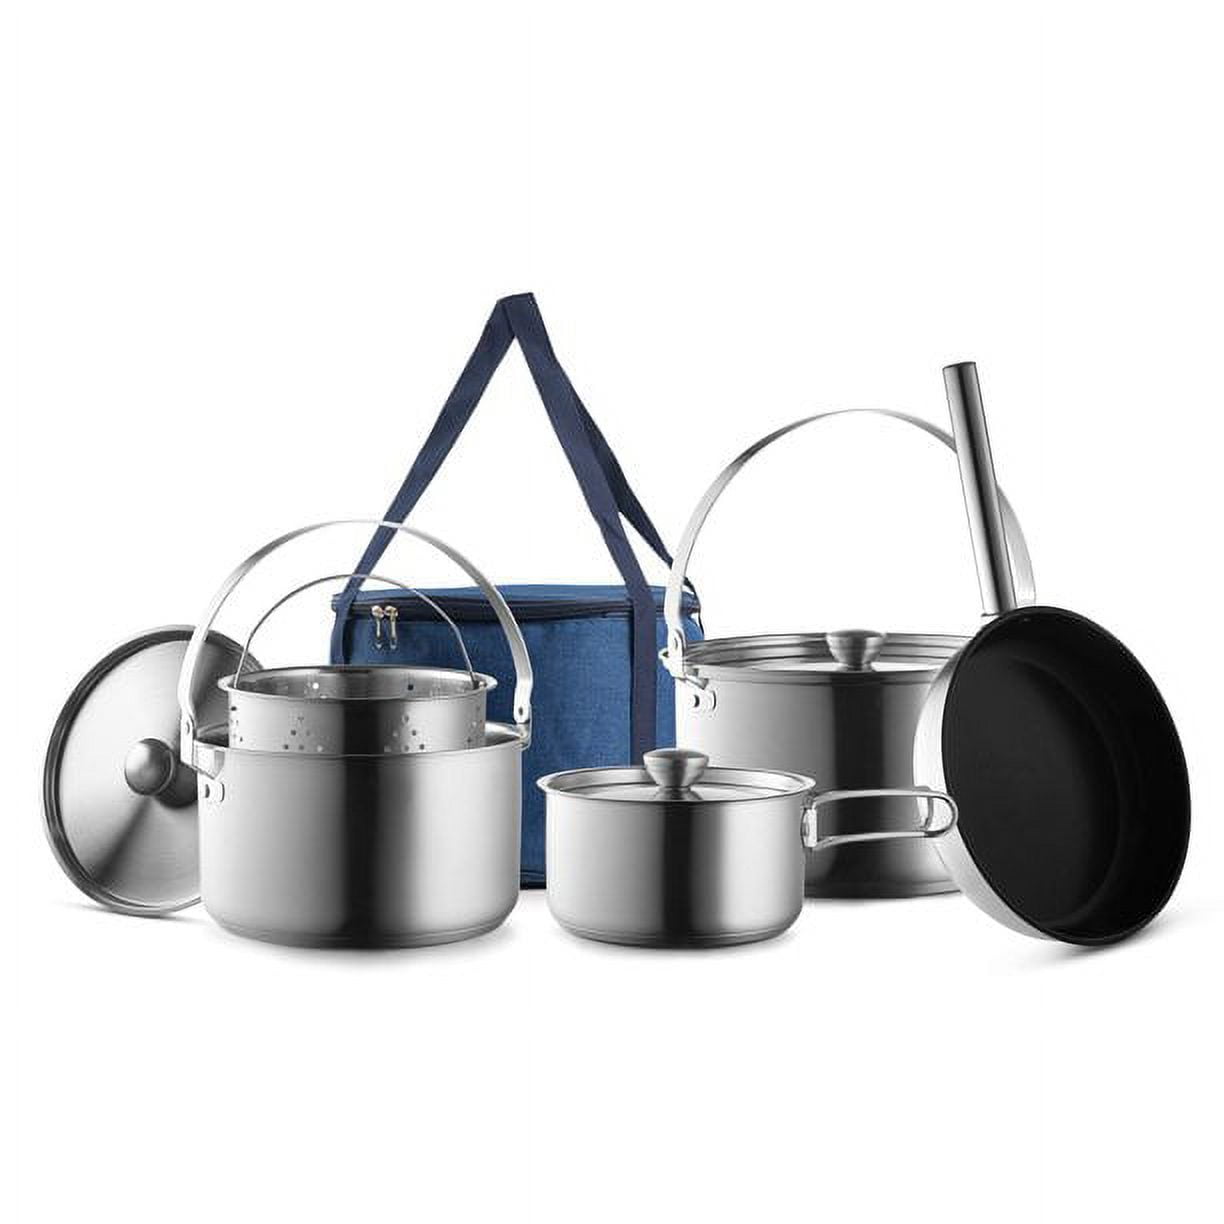 10cm Cooking Pot Cookware Sets Kitchenware Multipurpose Soup Pot Small Pot  Sauce Pan for Camping Outdoor Kitchen cooking